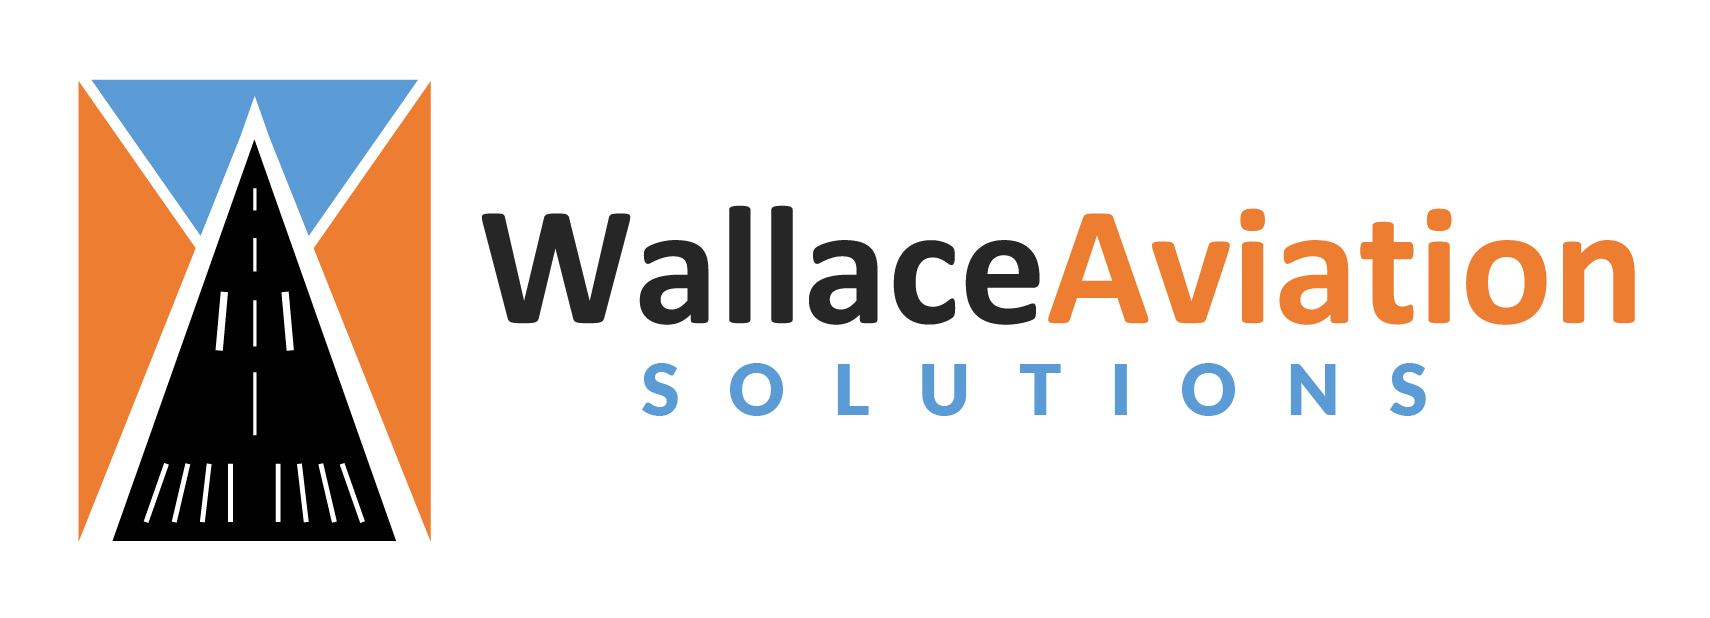 Wallace Aviation Solutions